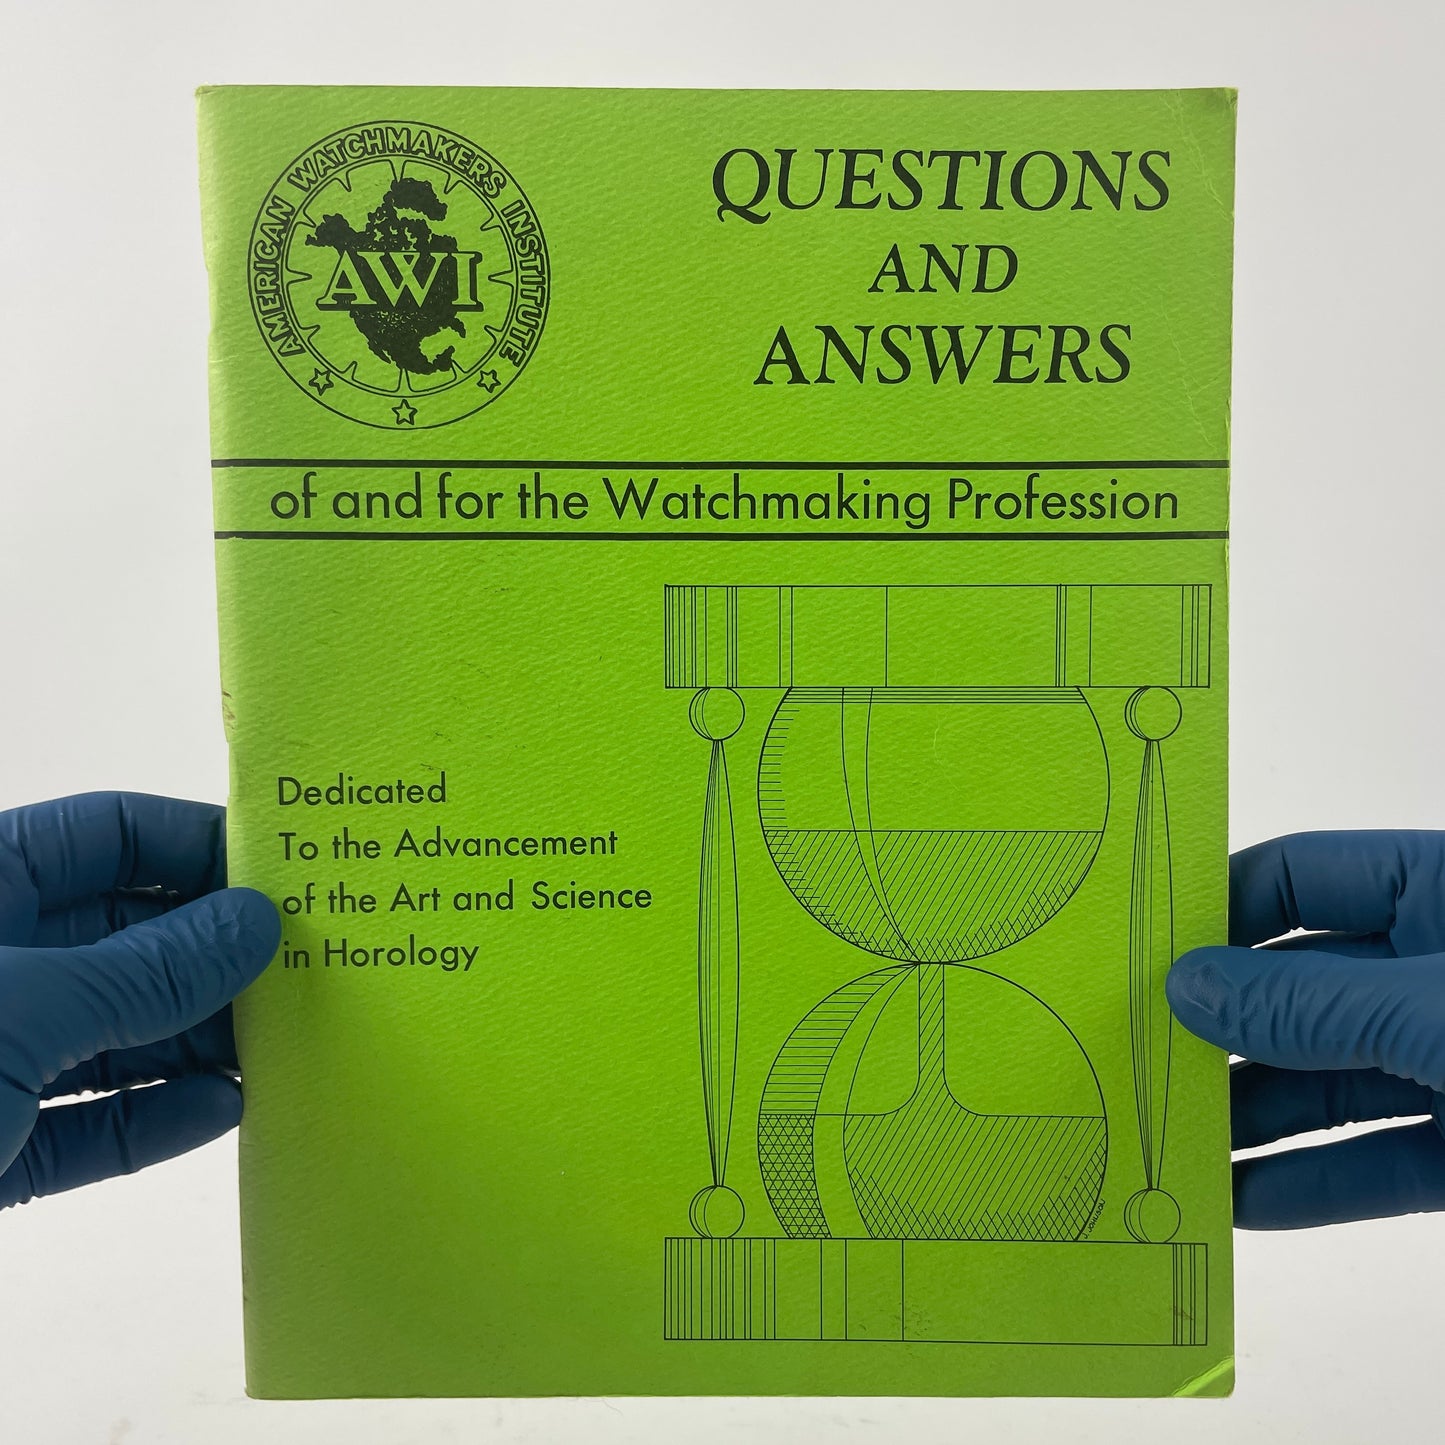 May Lot 87- Questions And Answers of and for the Watchmaking Profession